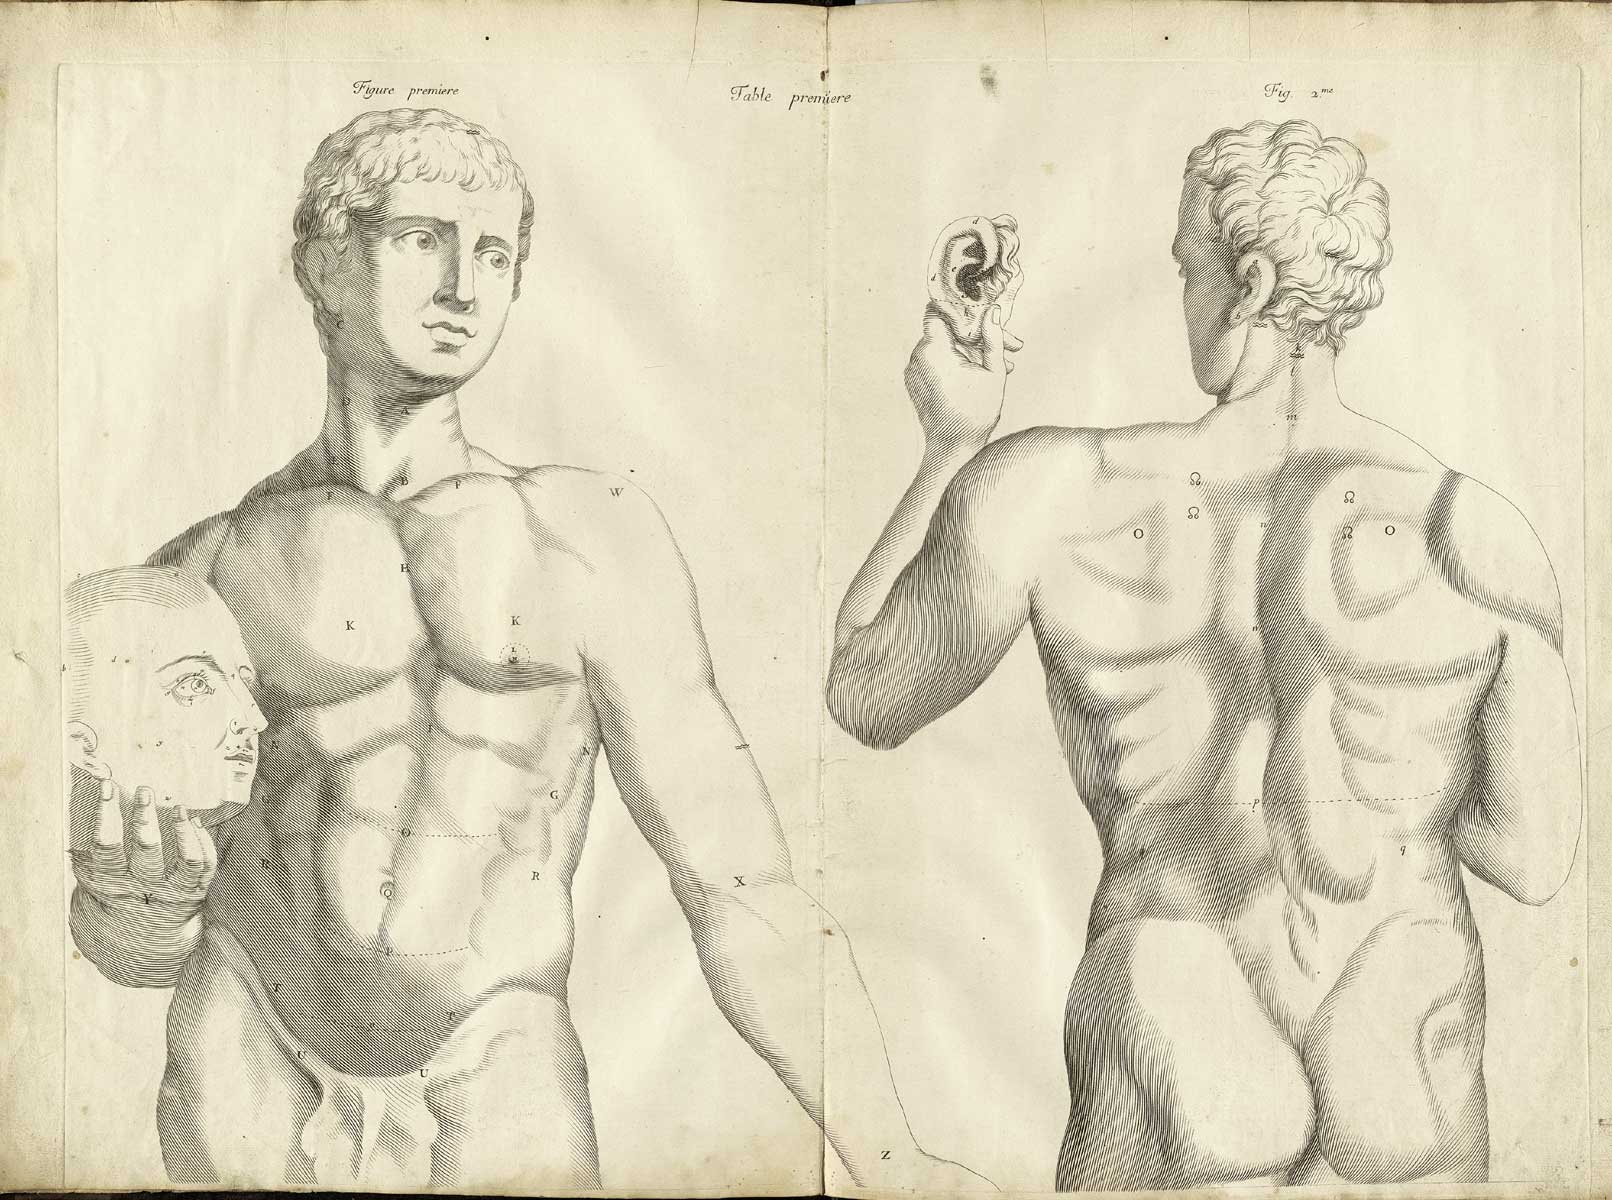 Engraving of two male anatomical figures shown from the waist up, the one of the left facing the viewer holding a human head in his right hand, the one on the right with his back to the viewer holding up a human ear in his right hand.